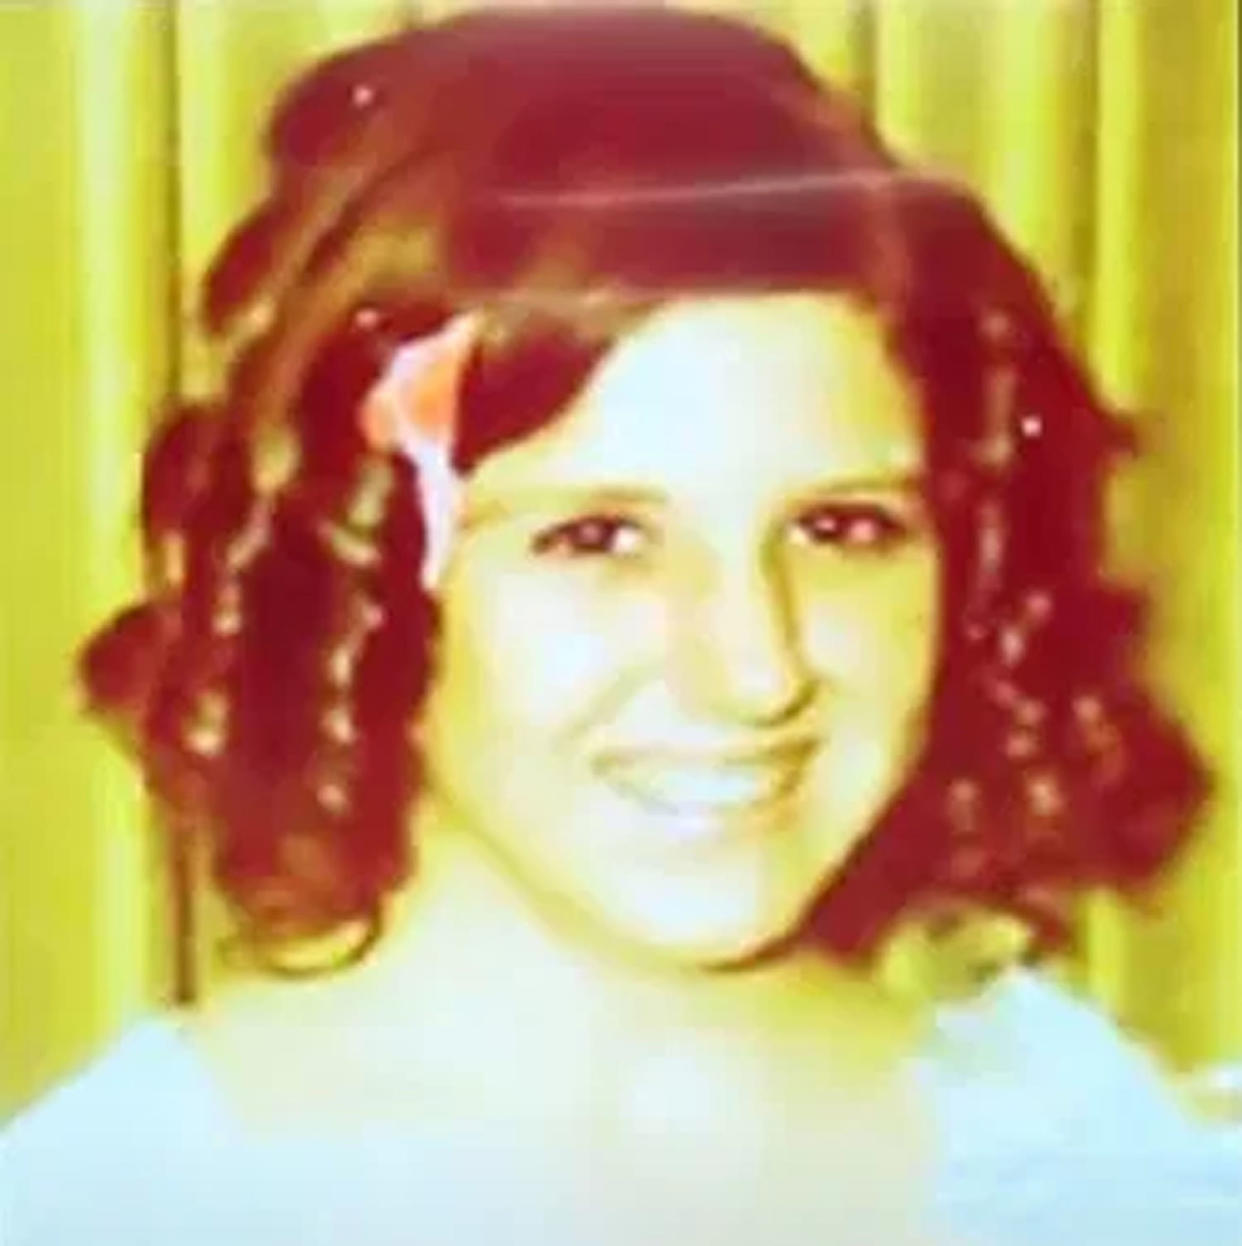 A second suspect was identified in connection to the murder of Pamela Lynn Conyers from Maryland who went missing more than 50 years ago, according to authorities. (Anne Arundel County Police Department)